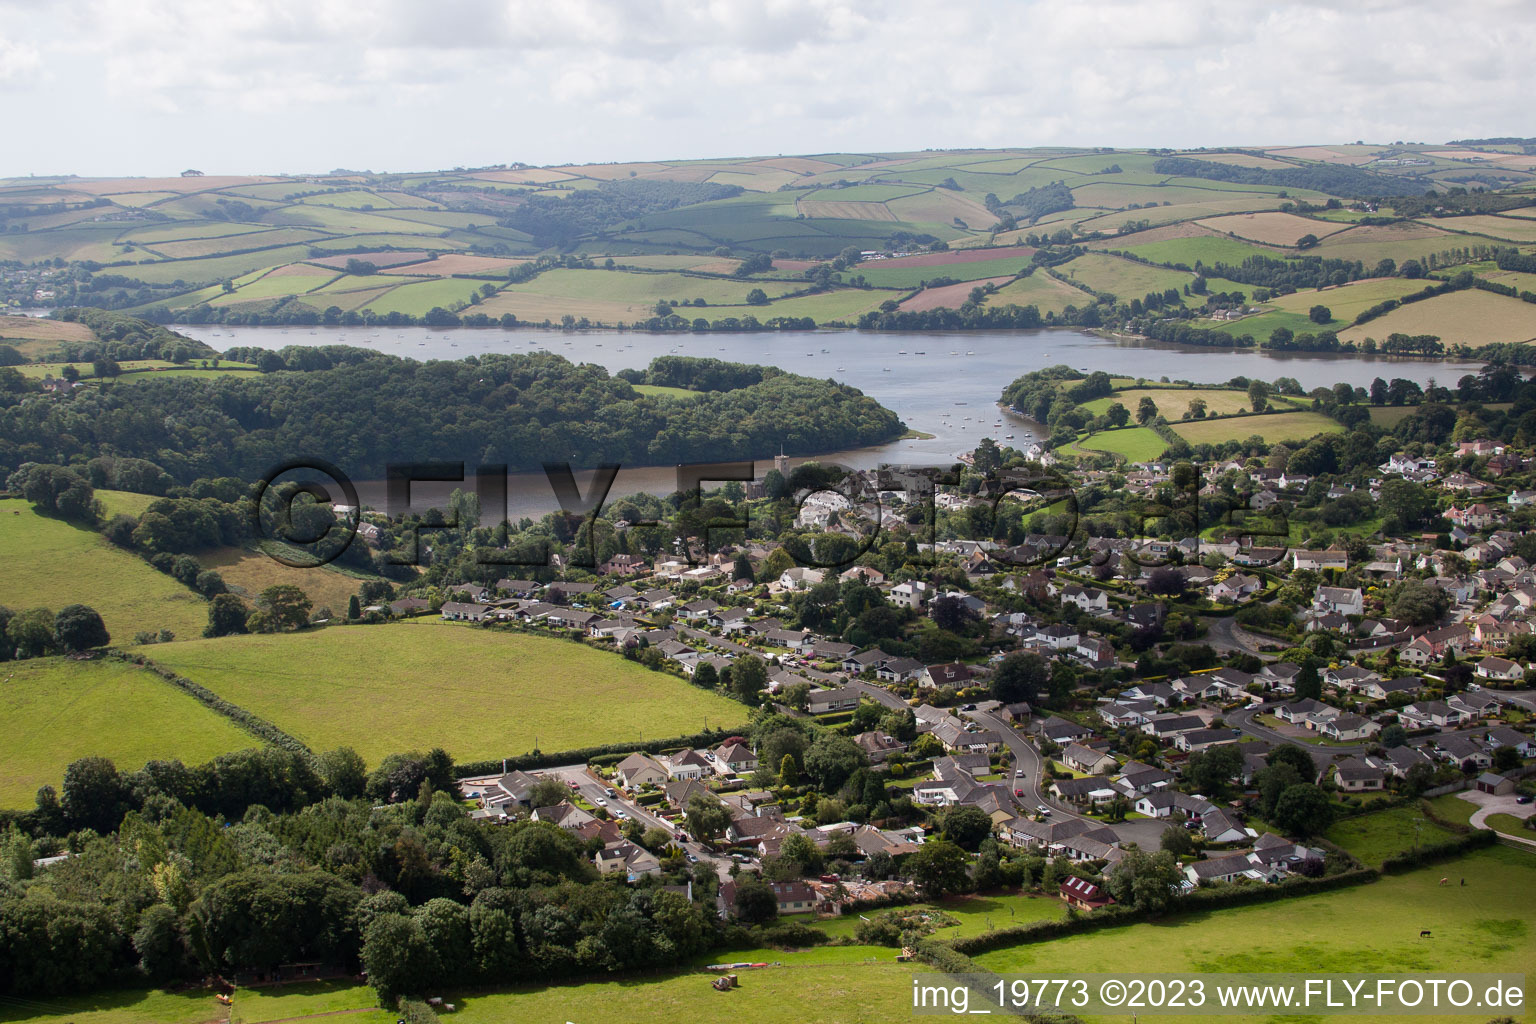 Aerial photograpy of Totnes in the state England, Great Britain